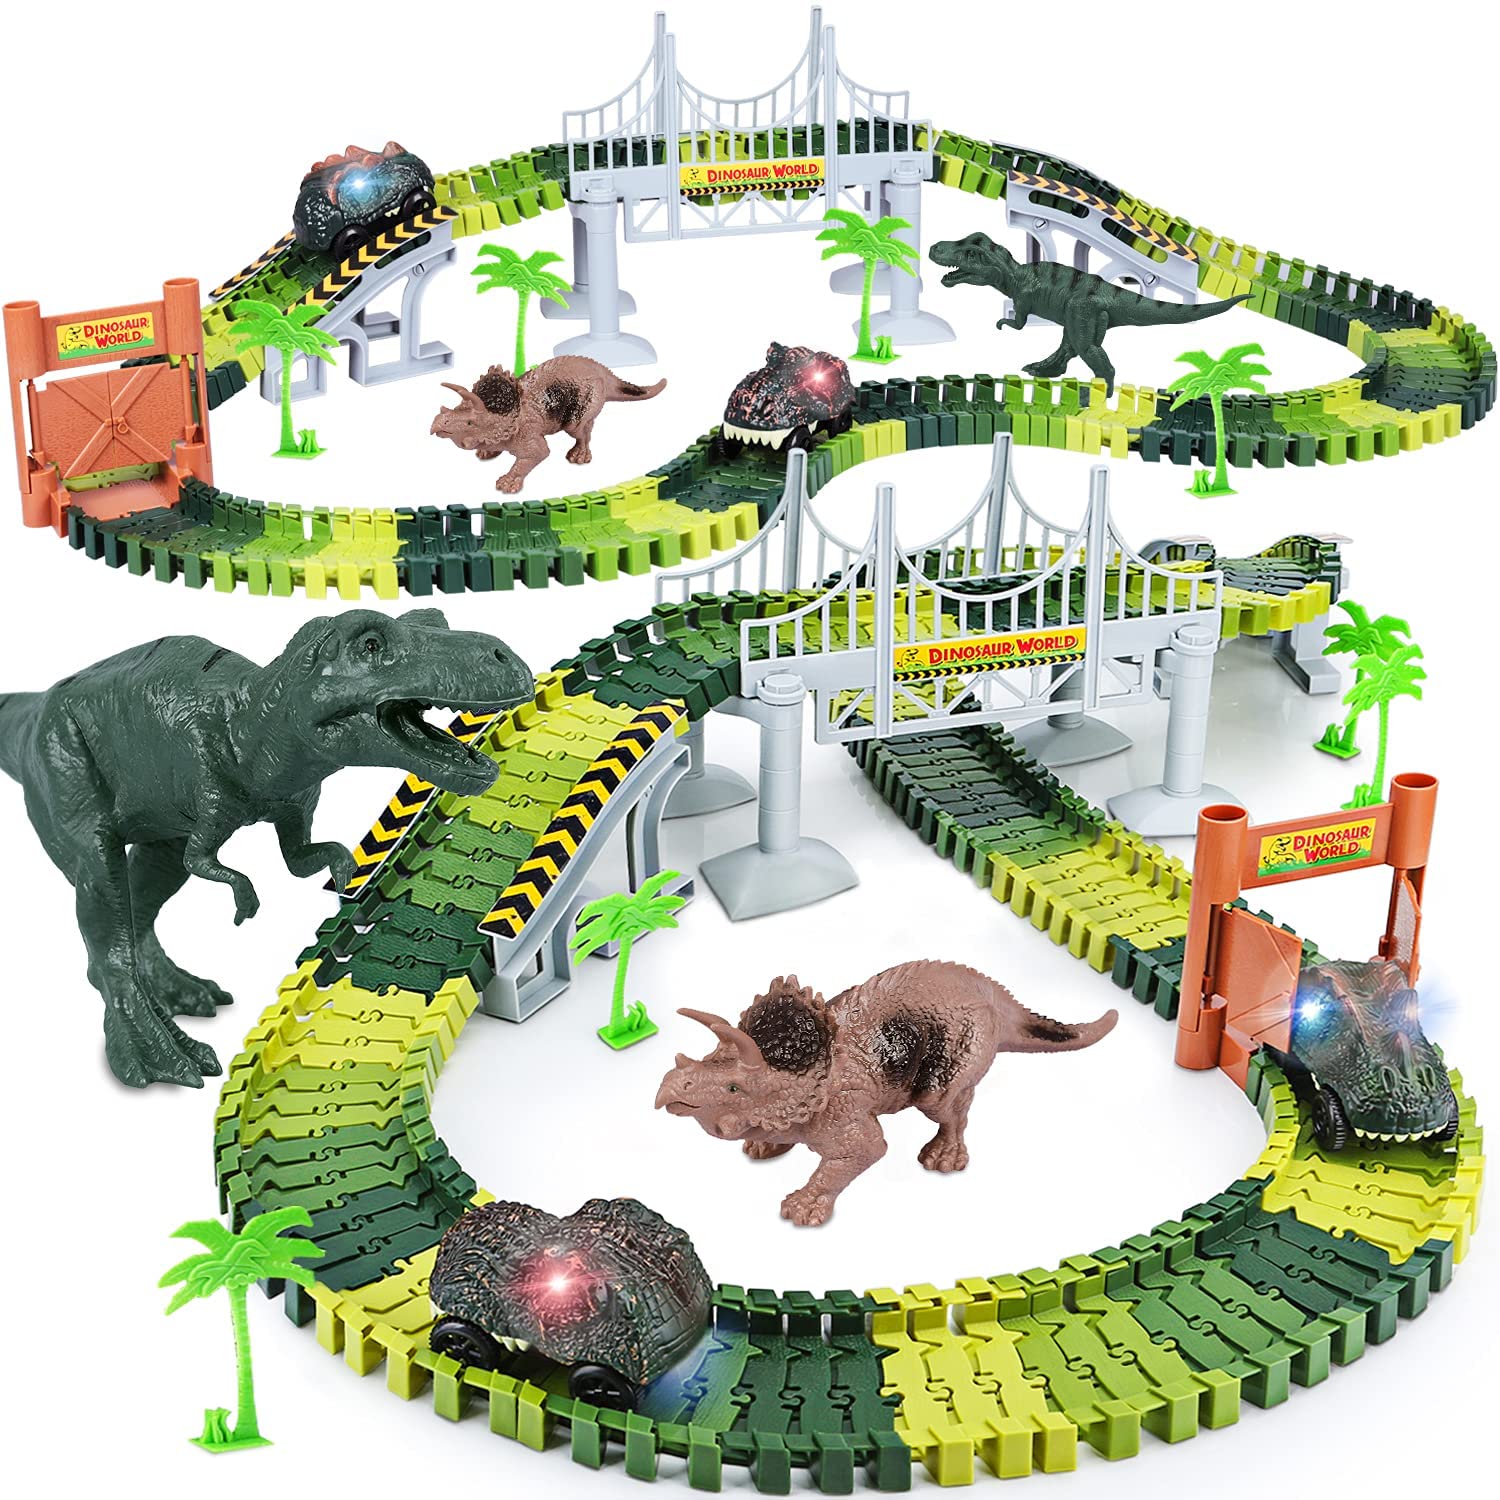 Toyk Battery-Powered Race Track Dinosaur Gift For Boys, 156-Piece